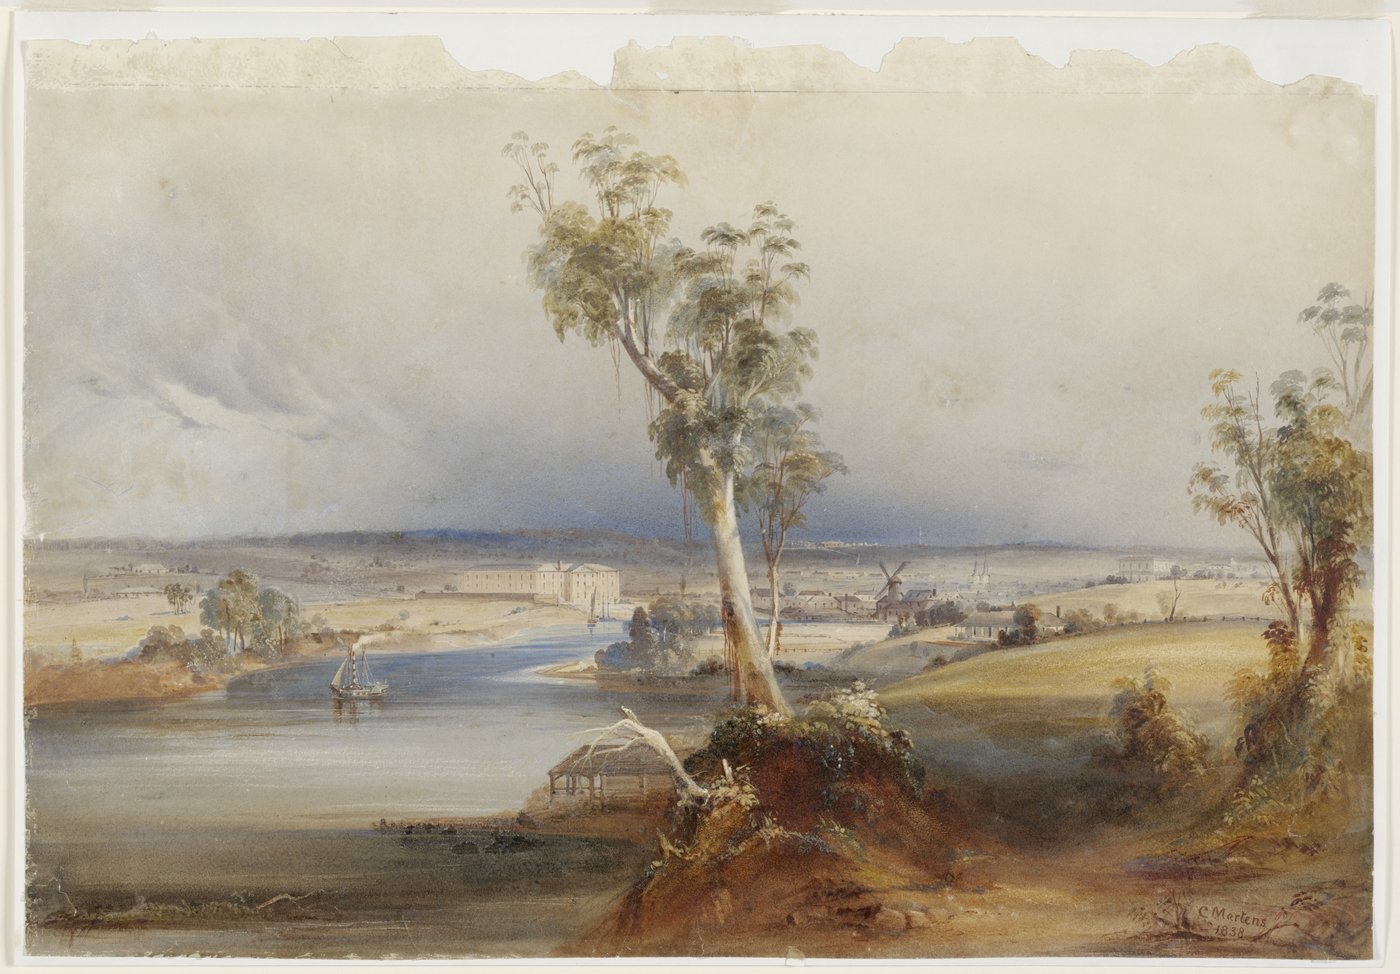  View of Parramatta, 1838. By C. Martens. Dixson Library, State Library of New South Wales 